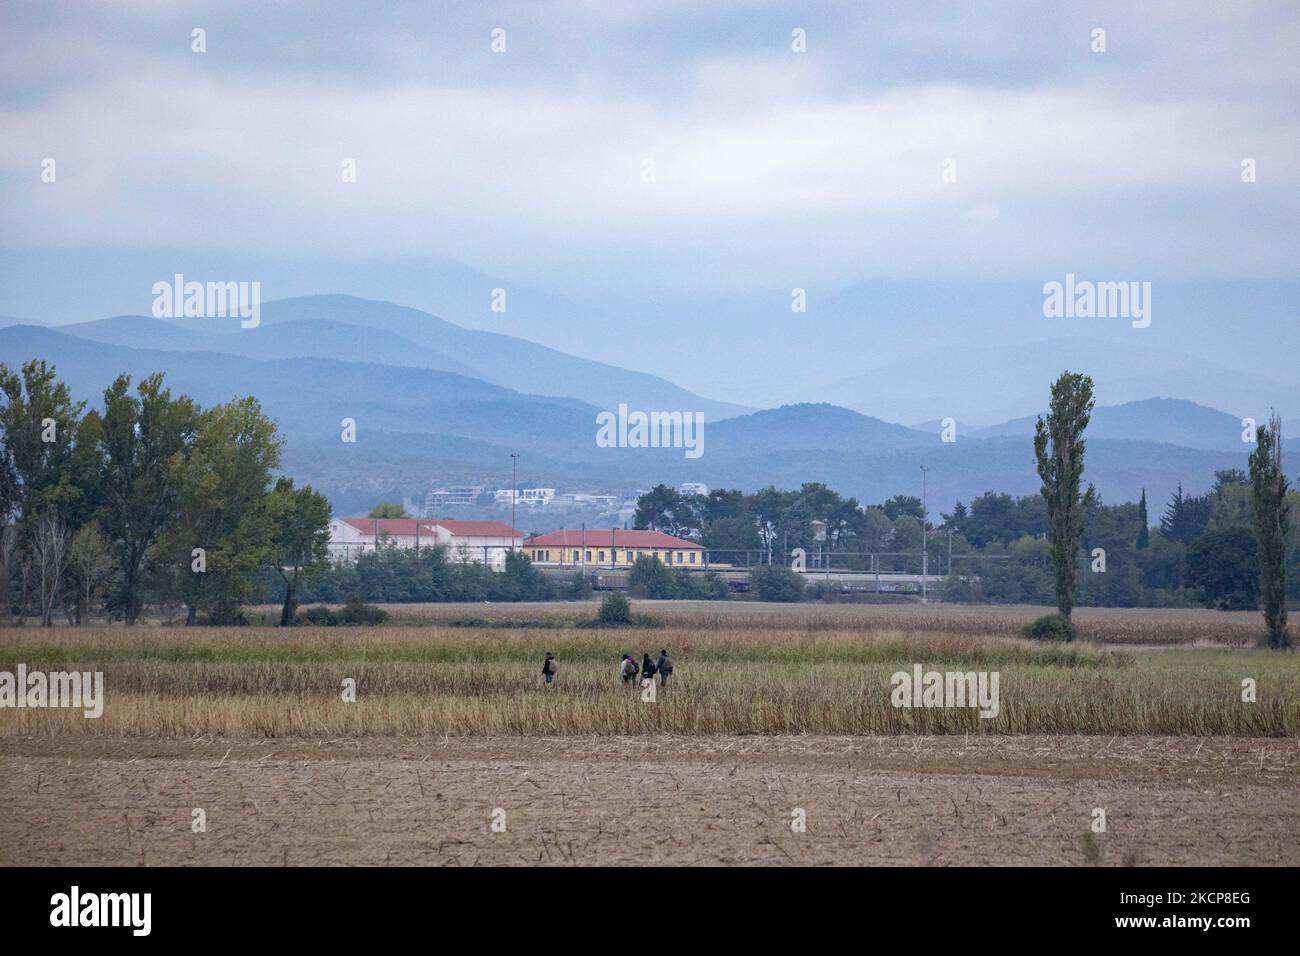 Migrants are seen walking in the fields with the iconic yellow train station of Idomeni and houses in N. Macedonia in the background. Asylum Seekers are trying to cross the Greek-North Macedonian borders to follow the Balkan Route, famous in 2015-2016 during the Syrian refugee crisis, from Idomeni, Greece to Gevgelija, North Macedonia following the train rails and railway station and then reach central and northern Europe. Refugees and Migrants are seen walking in the fields in the Greek side, before the fence that separates the two countries, trying to reach and pass the borders. The small gr Stock Photo